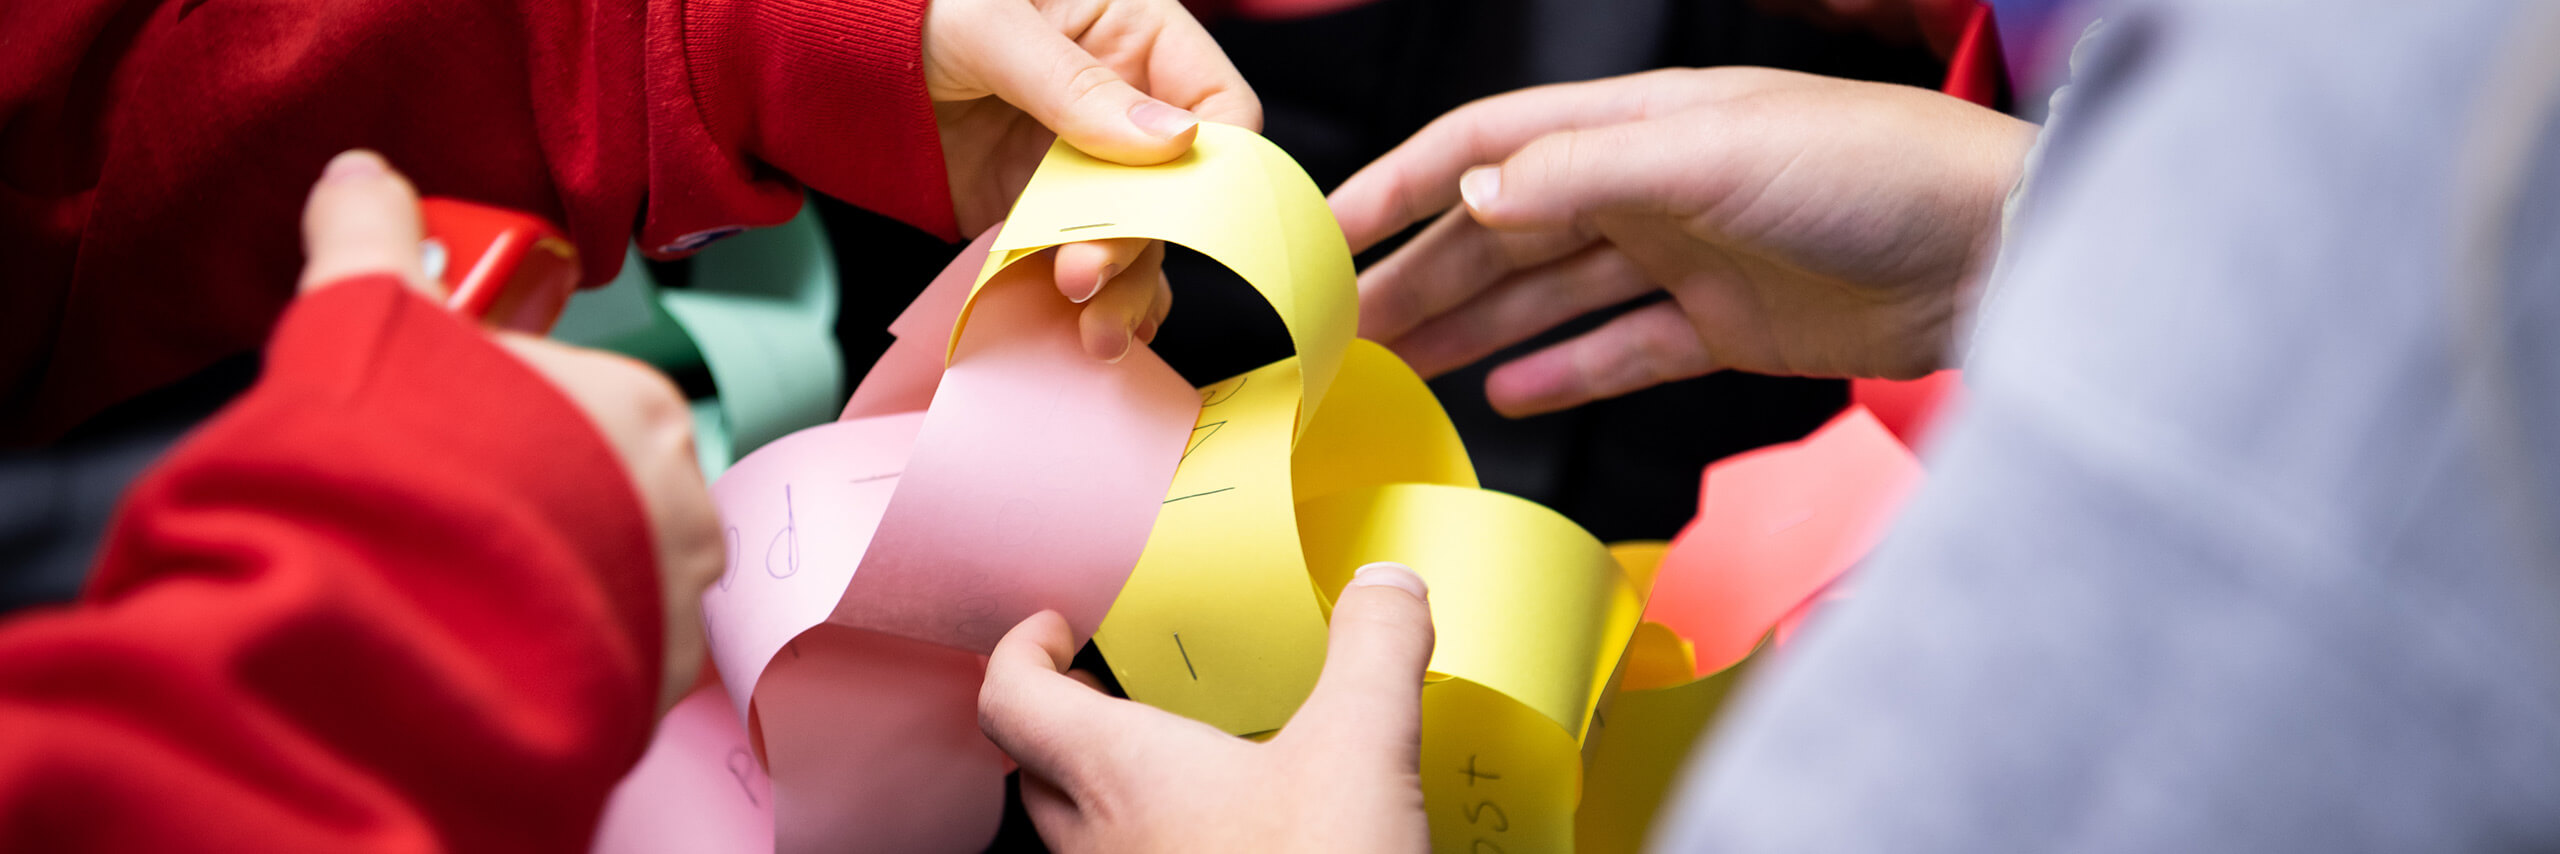 Group creating a colorful paper chain.